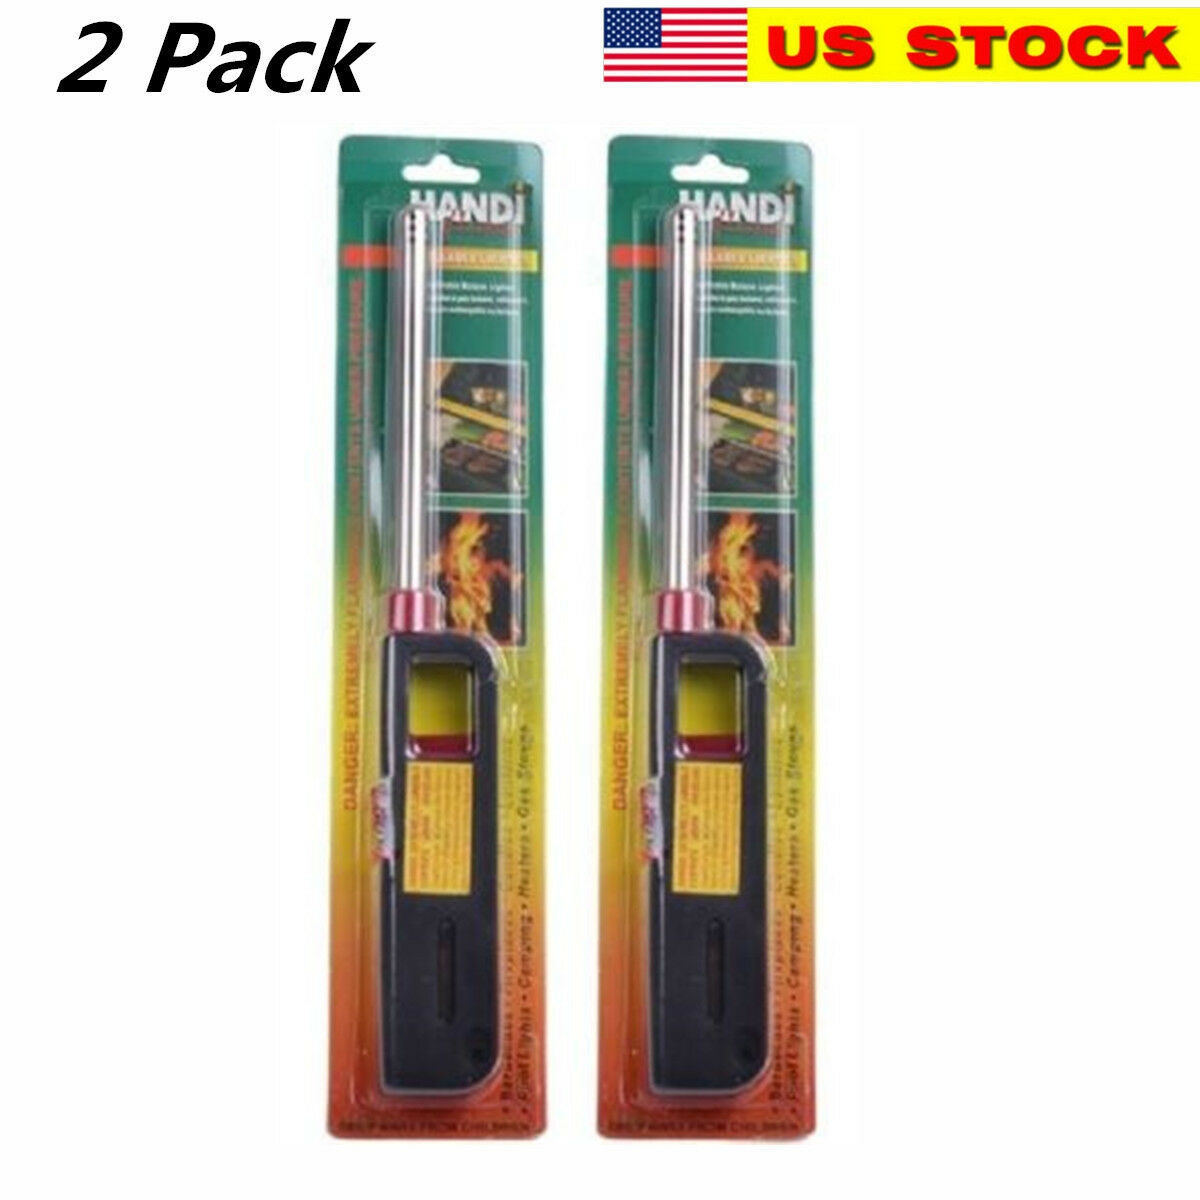 2pk Bbq Grill Lighter Refillable Butane Gas Candle Fireplace Kitchen Stove Long